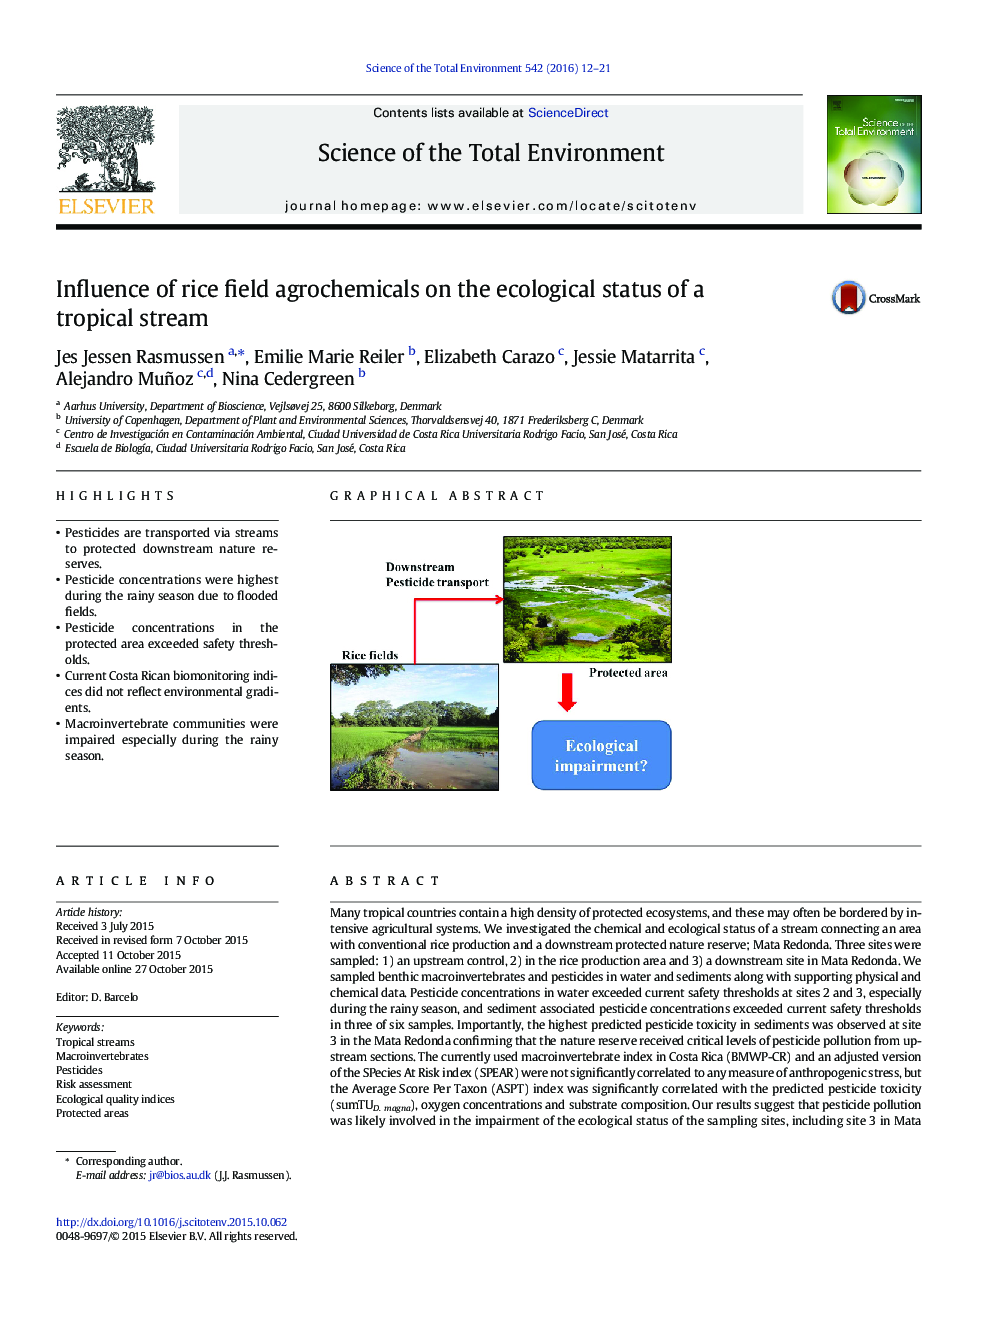 Influence of rice field agrochemicals on the ecological status of a tropical stream